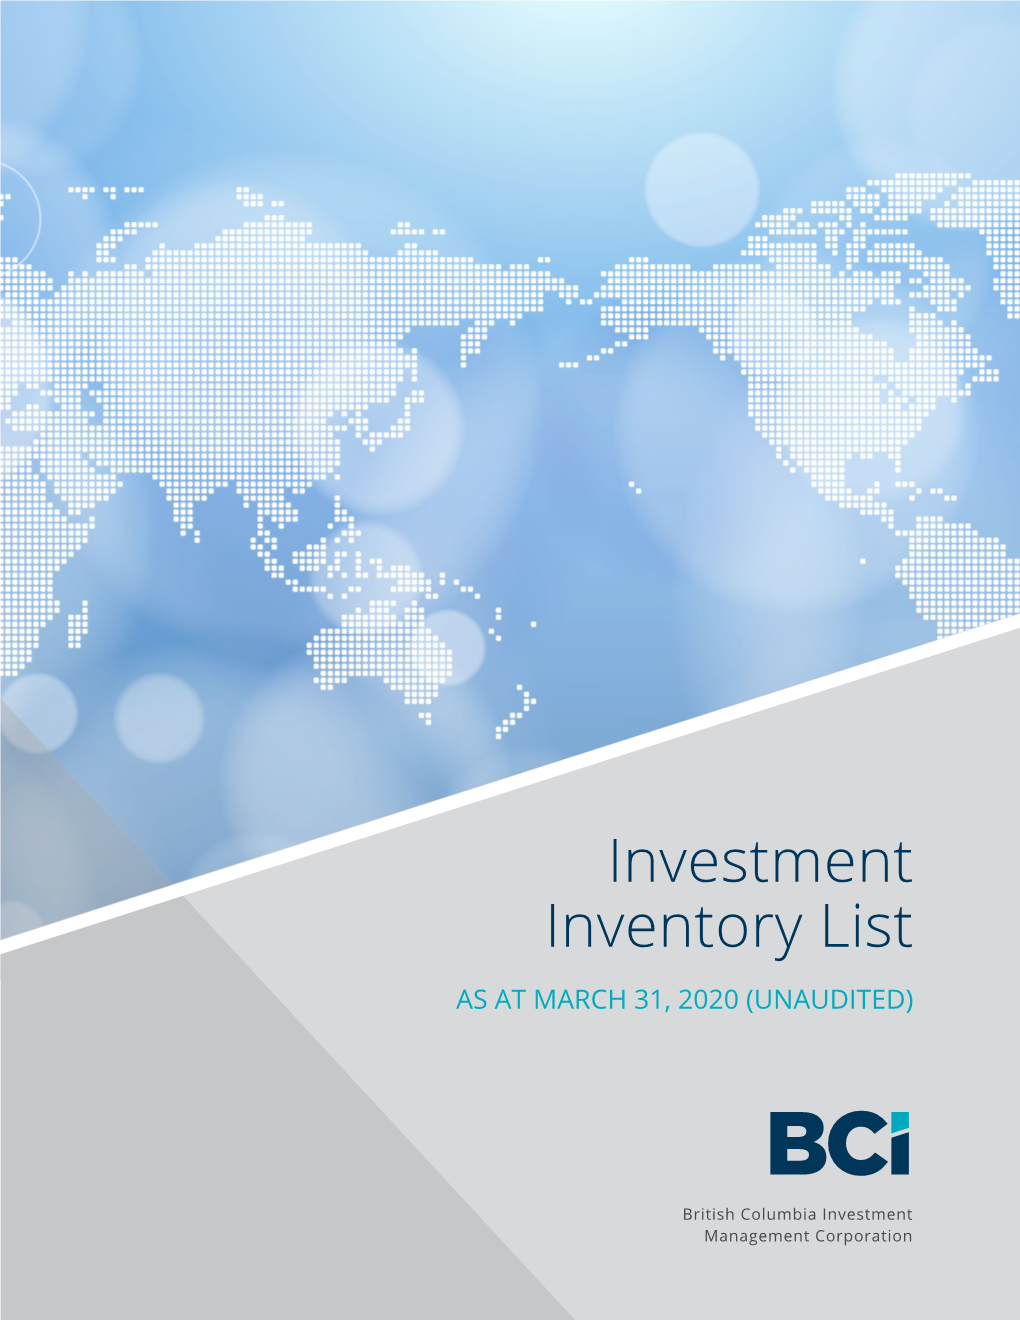 BCI's Investment Inventory List